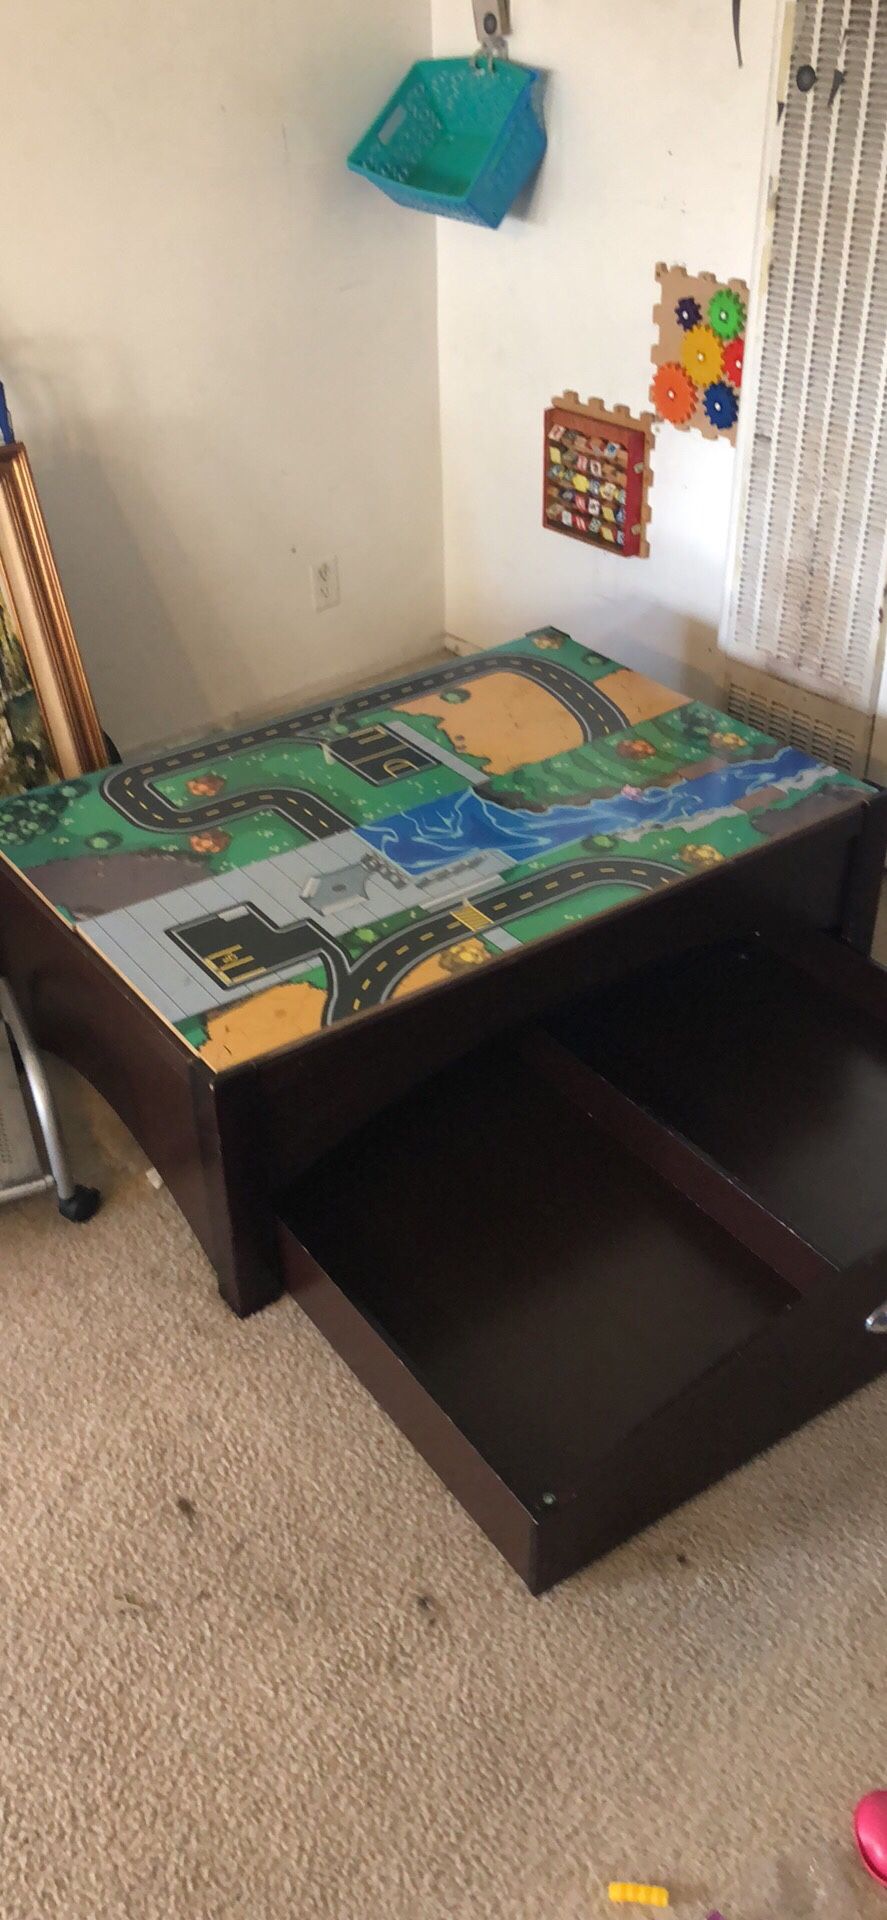 Moved out SELL - kidkraft Metropolis train table itself $50 takes it today Mon Jan 27th!